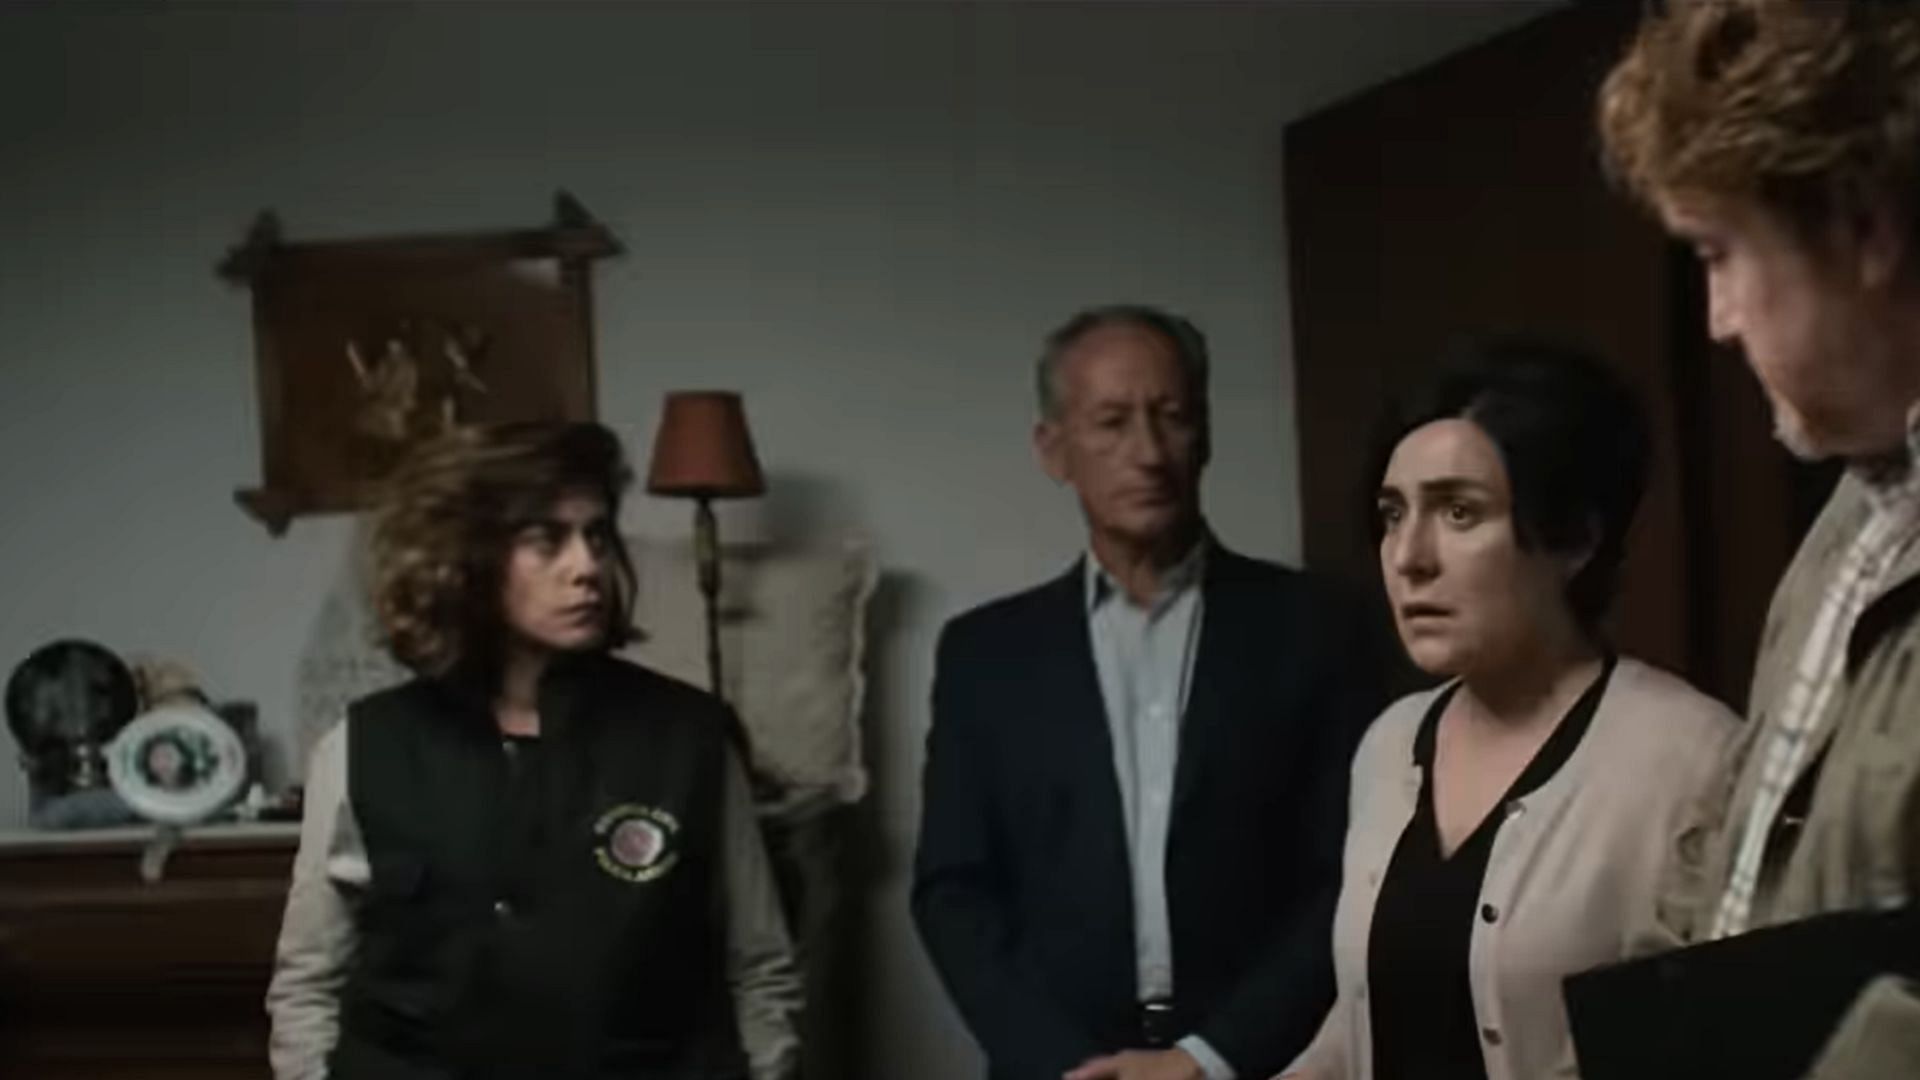 A scene showing the ongoing investigation (Image via Netflix)